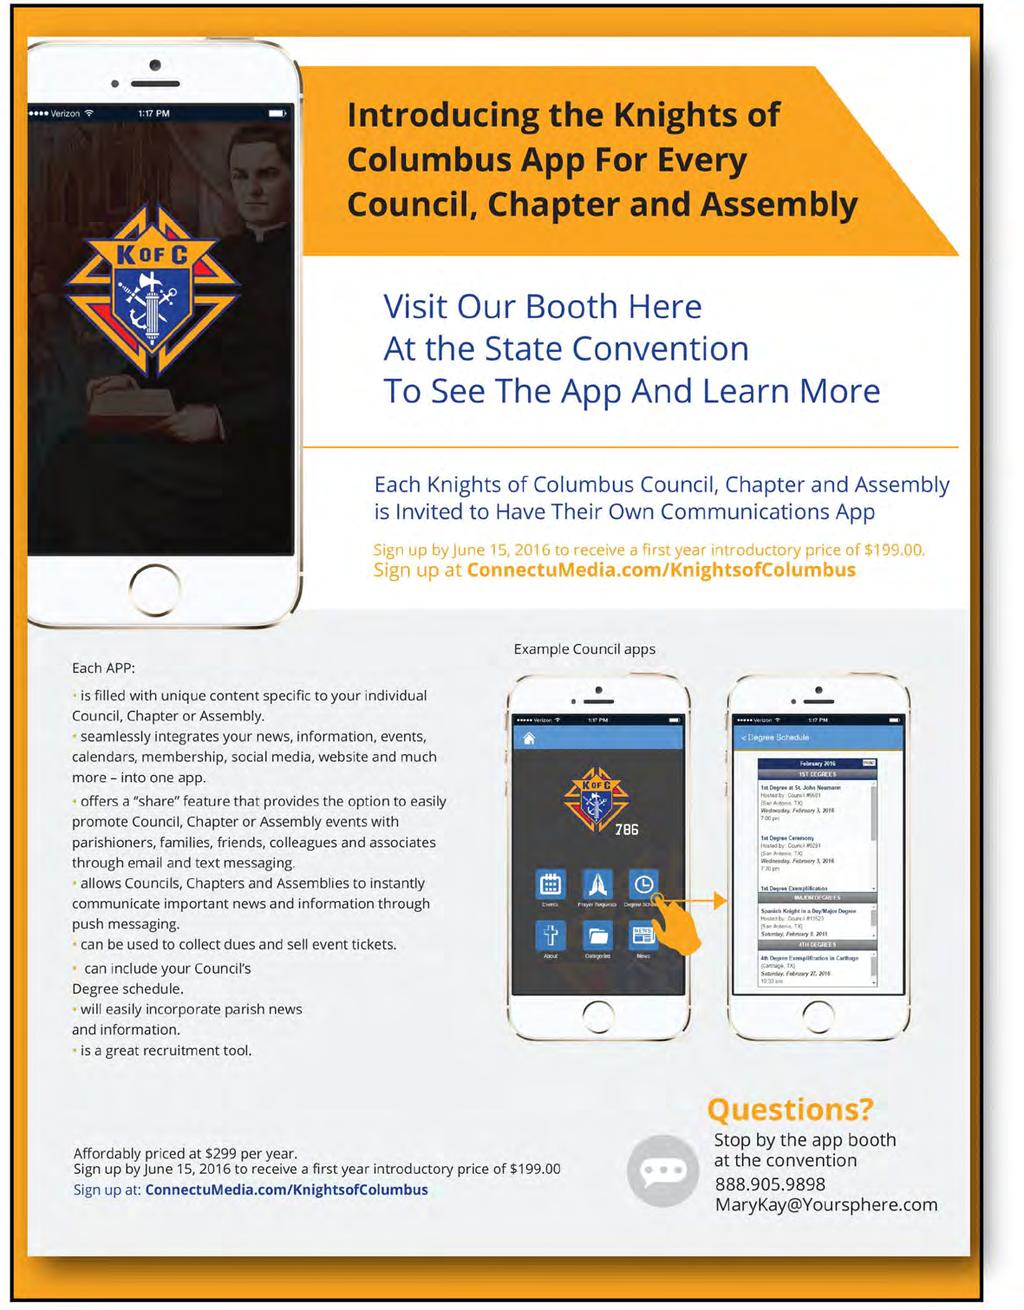 Each Knight of Columbus Council, Chapter and Assembly is Invited to have their Own Communication App Sign up by June 30, 2018 to receive a First Year Introductory Price of $199.